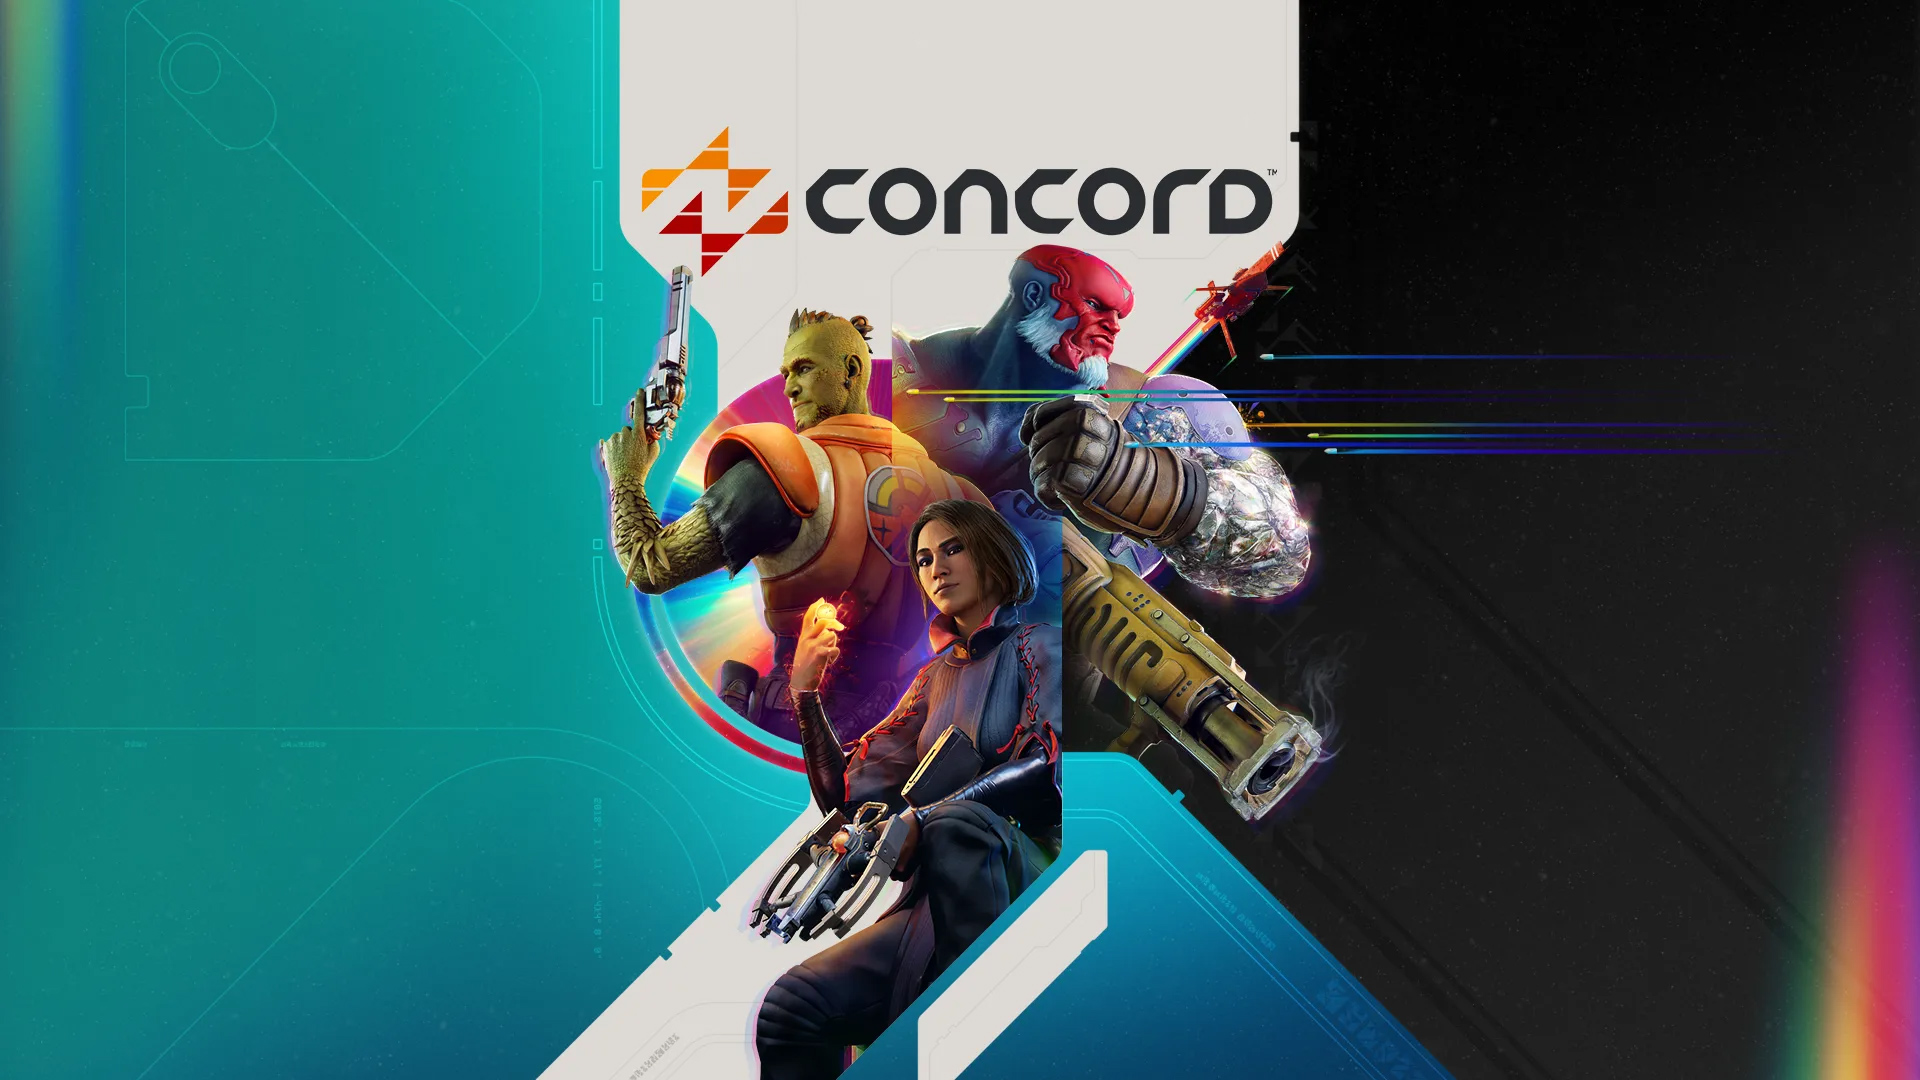 Concord is a 5v5 character-driven, first-person multiplayer shooter